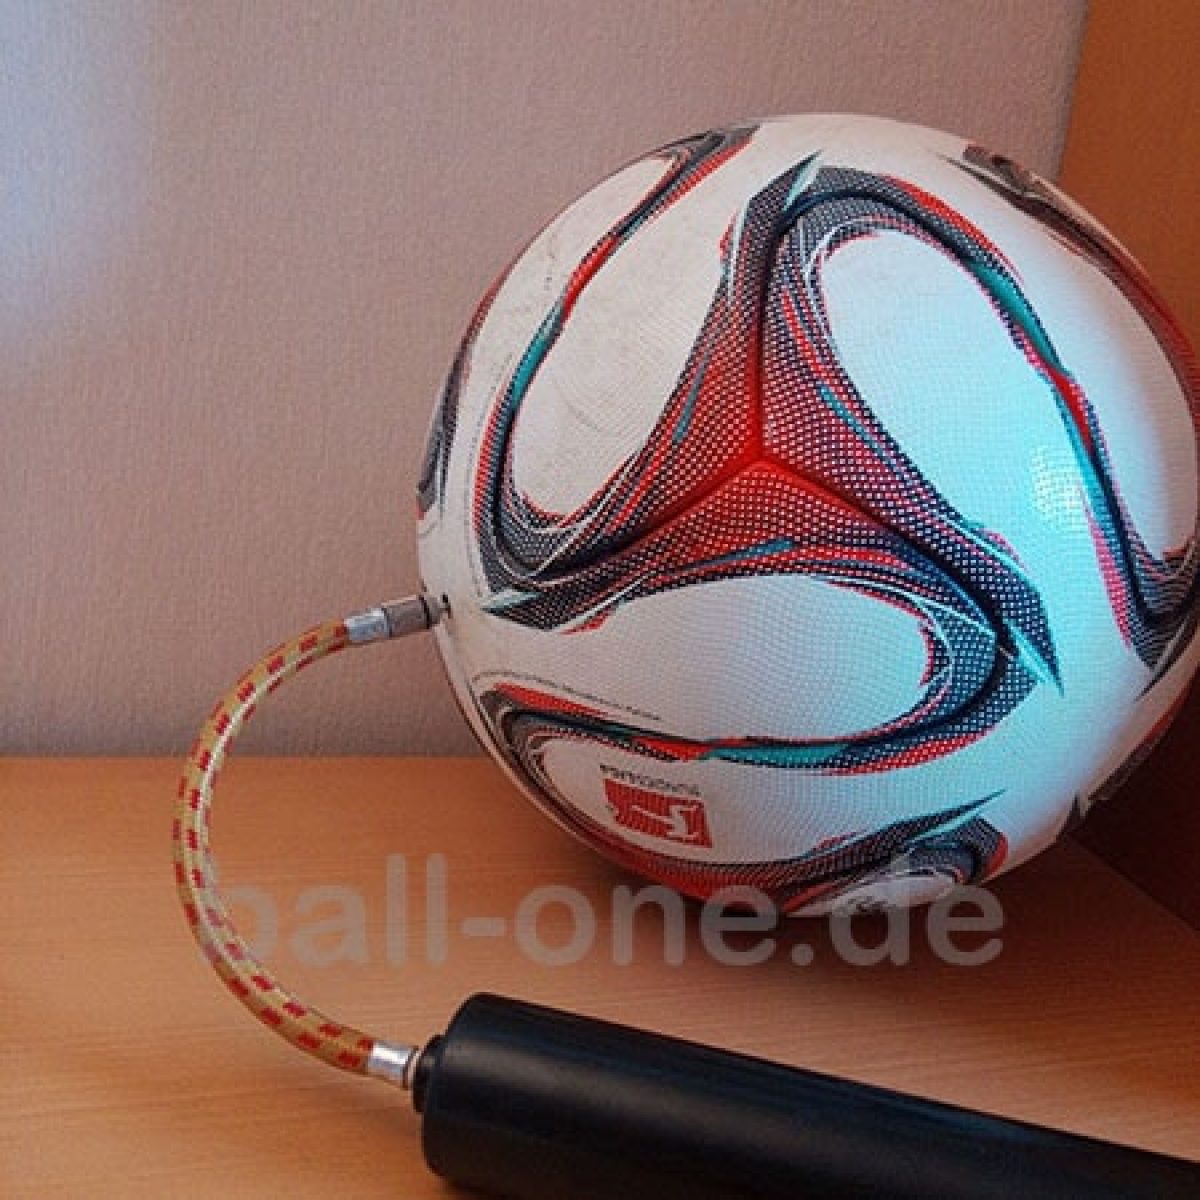 How to Inflate a Soccer Ball: Pumping, Maintenance, and More